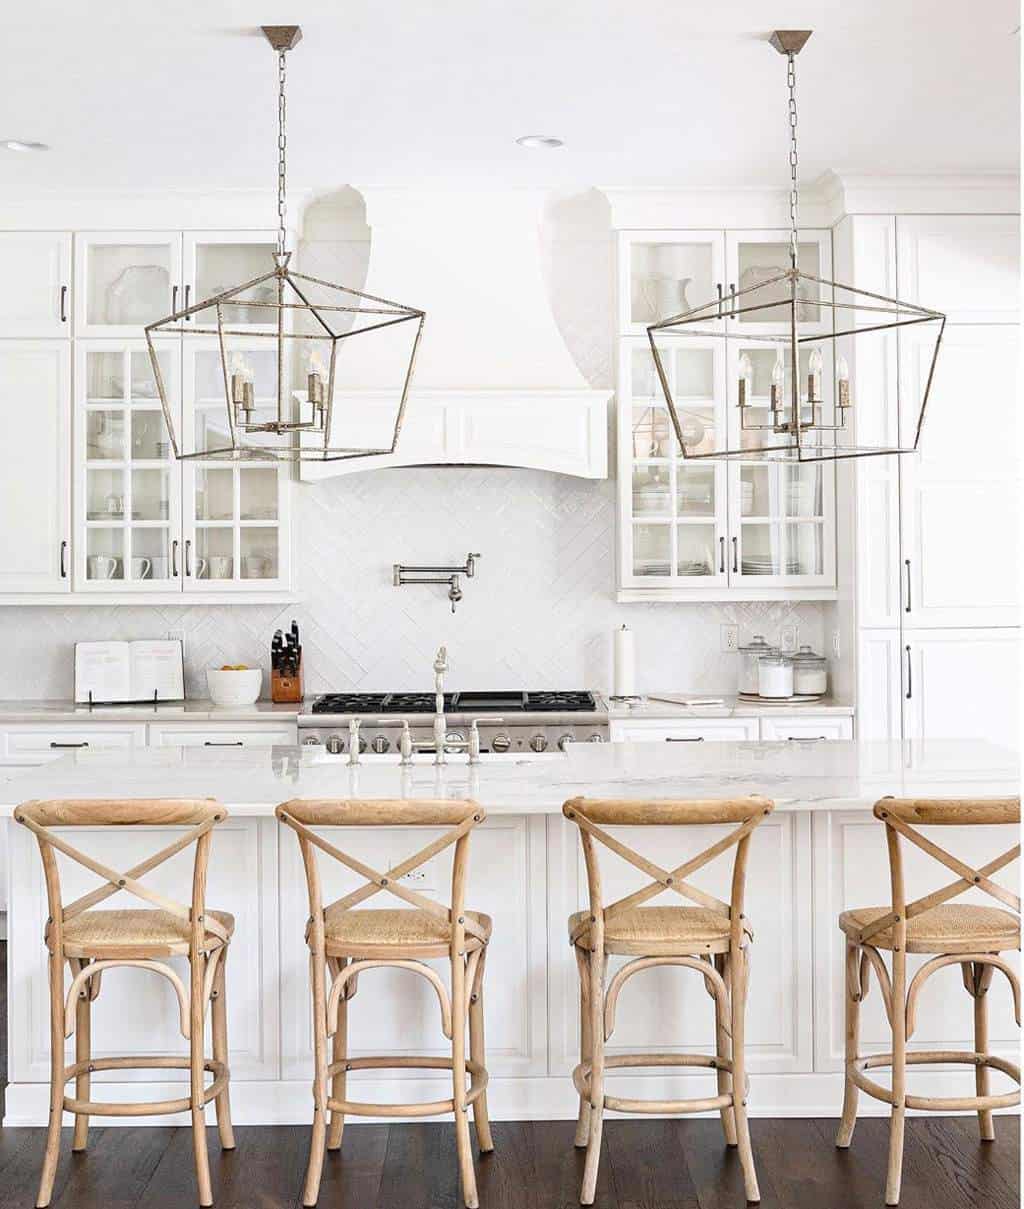 white kitchen interiors with brown chairs and ceiling lights